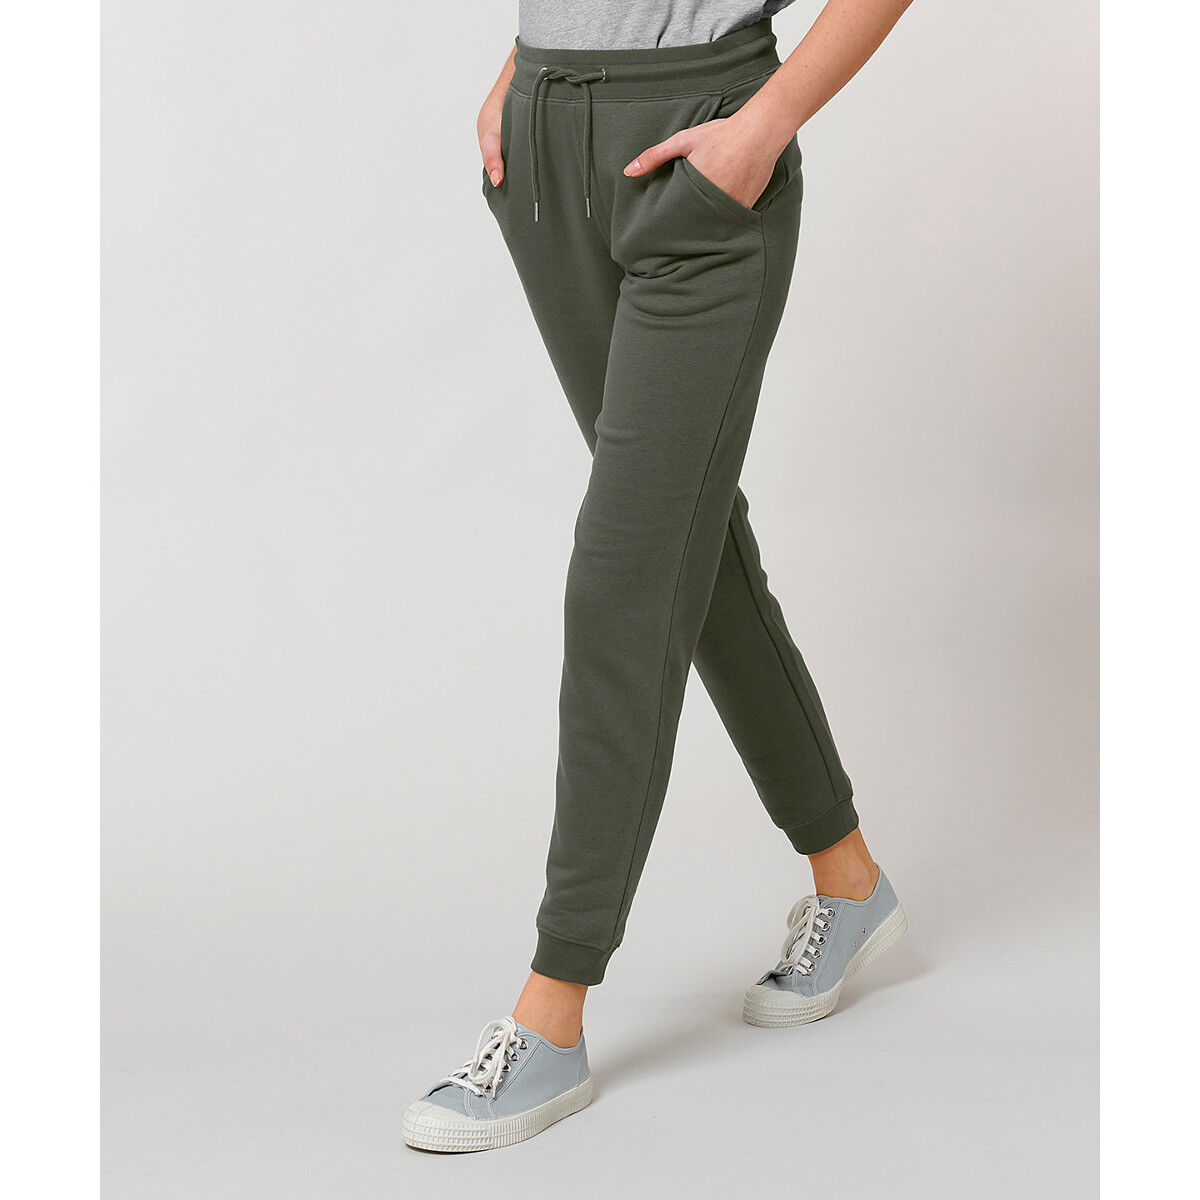 Stanley Stella unisex organic recycled jogger pants